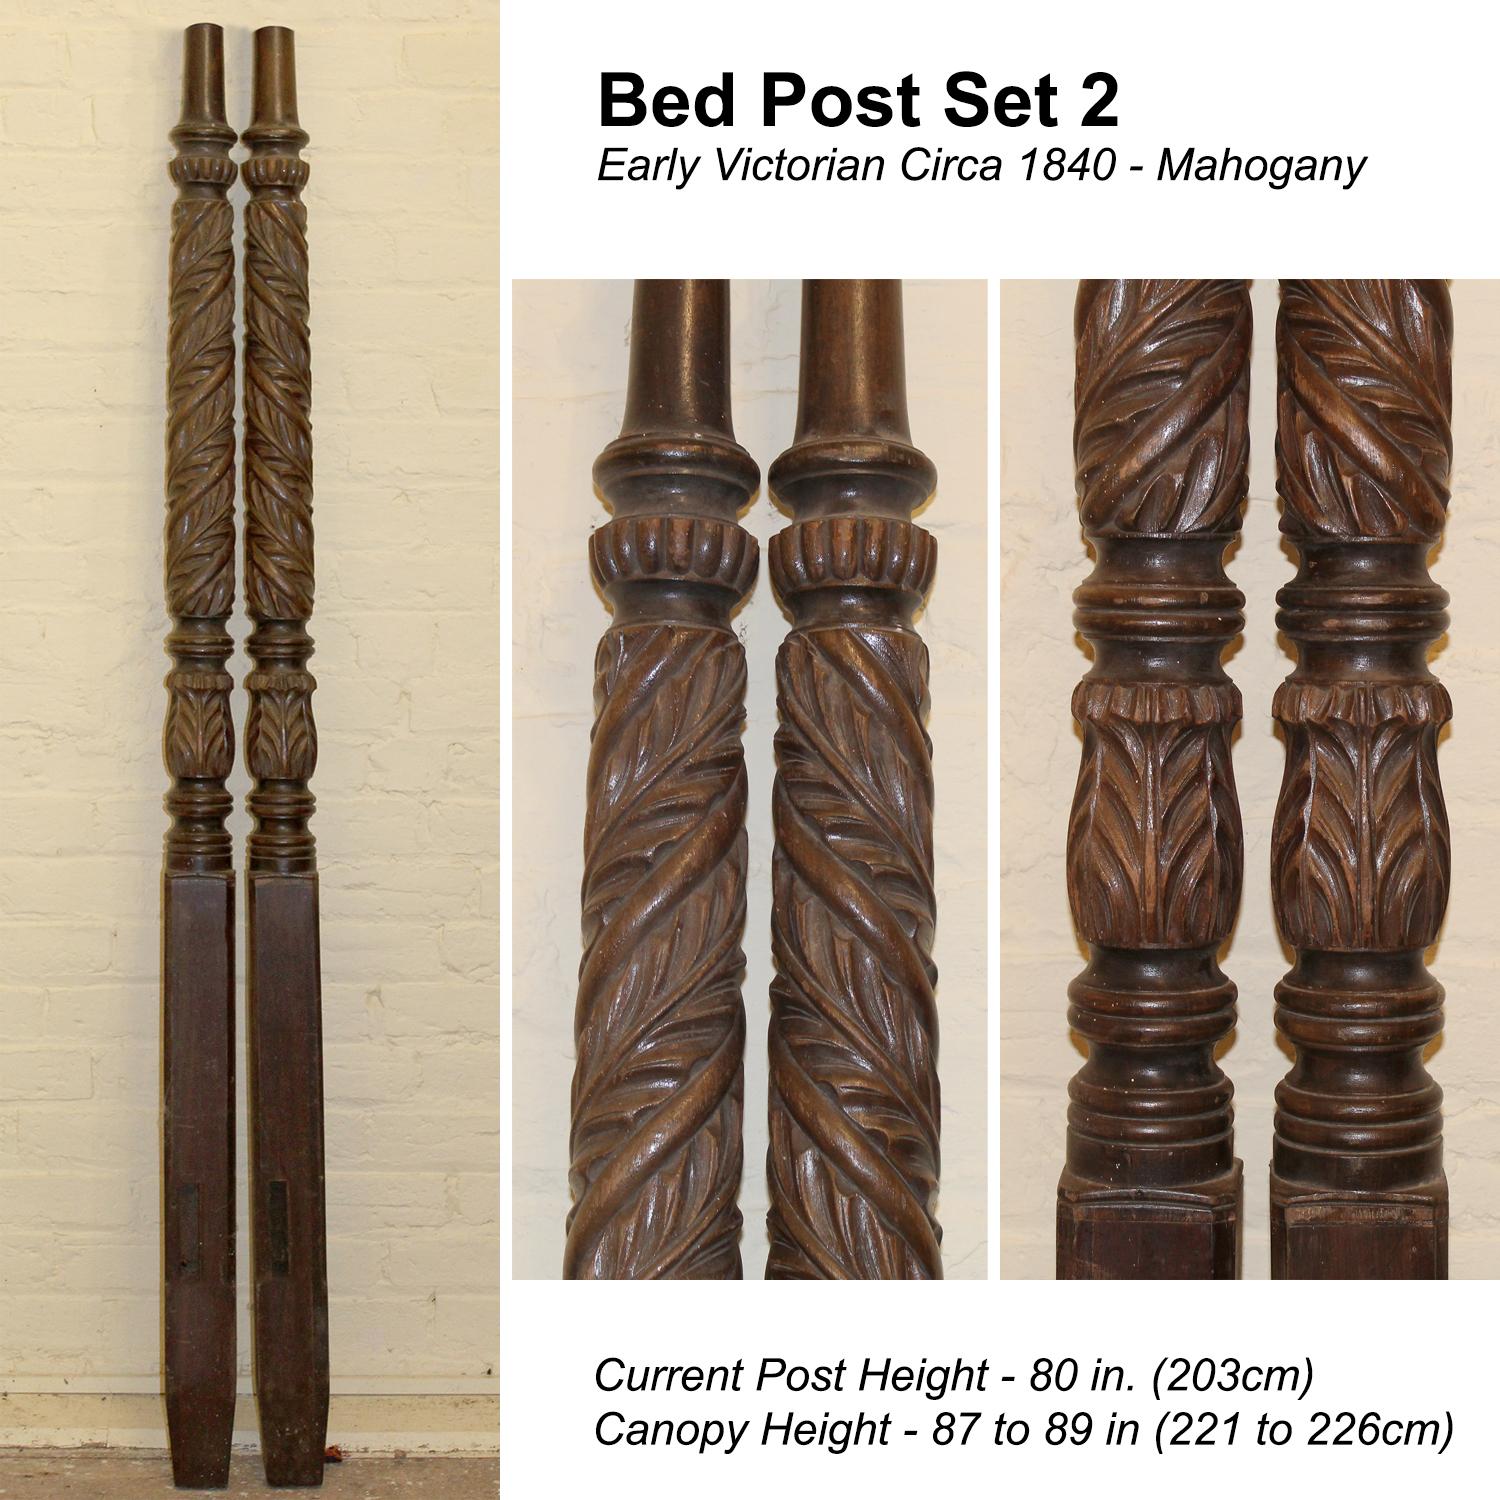 A made-to-order reconstructed four poster bed using original antique mahogany decorative front posts.
Our skilled craftsmen construct a four poster bed in the same style as the original bed with genuine antique front posts, using hardwood similar to